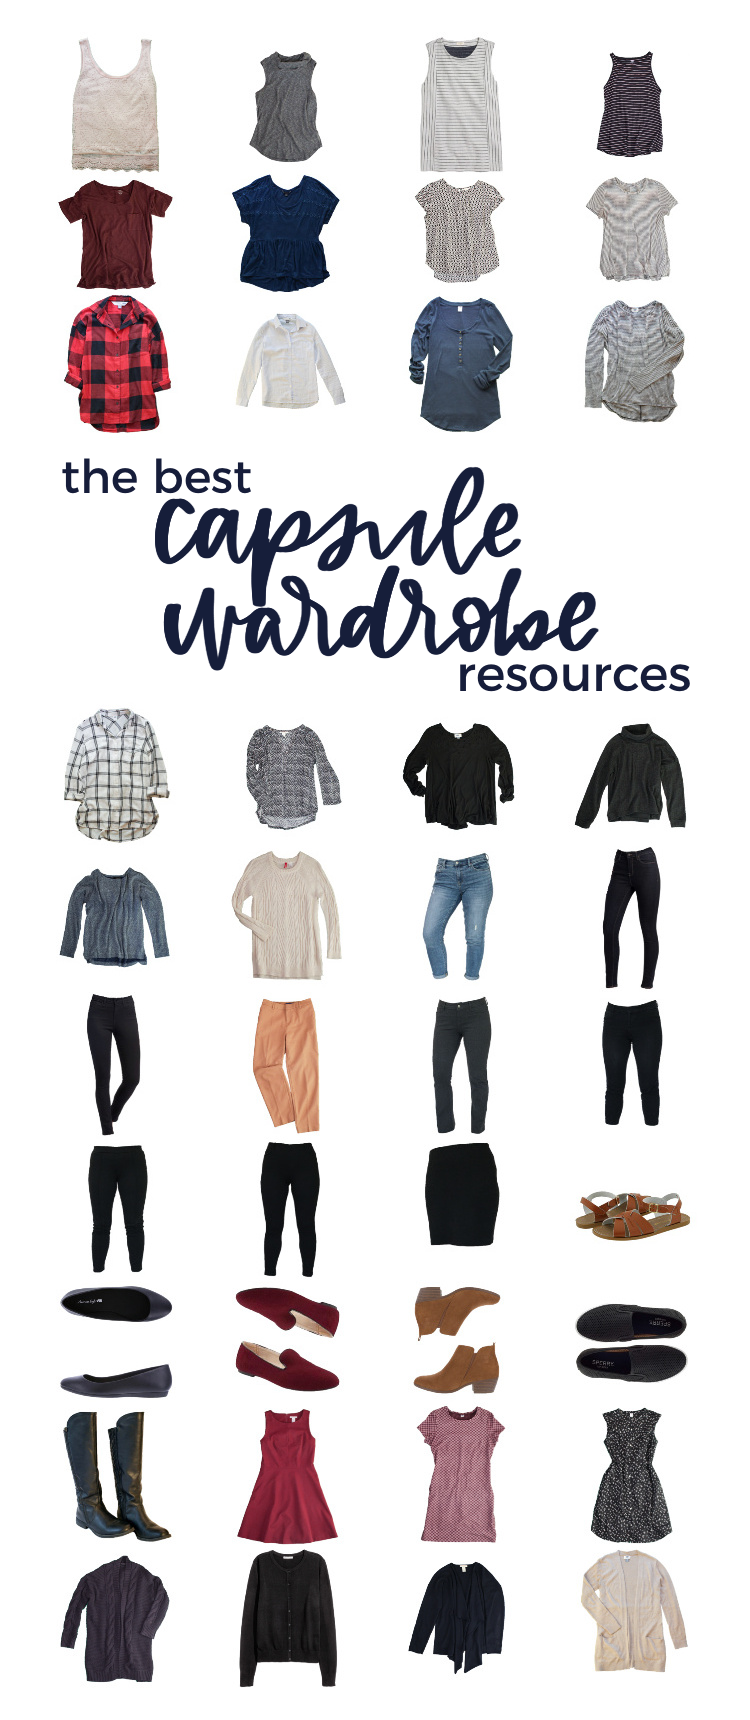 https://michelleamandawilson.com/wp-content/uploads/2019/10/Capsule-Wardrobe-Resources-Pin-1.png